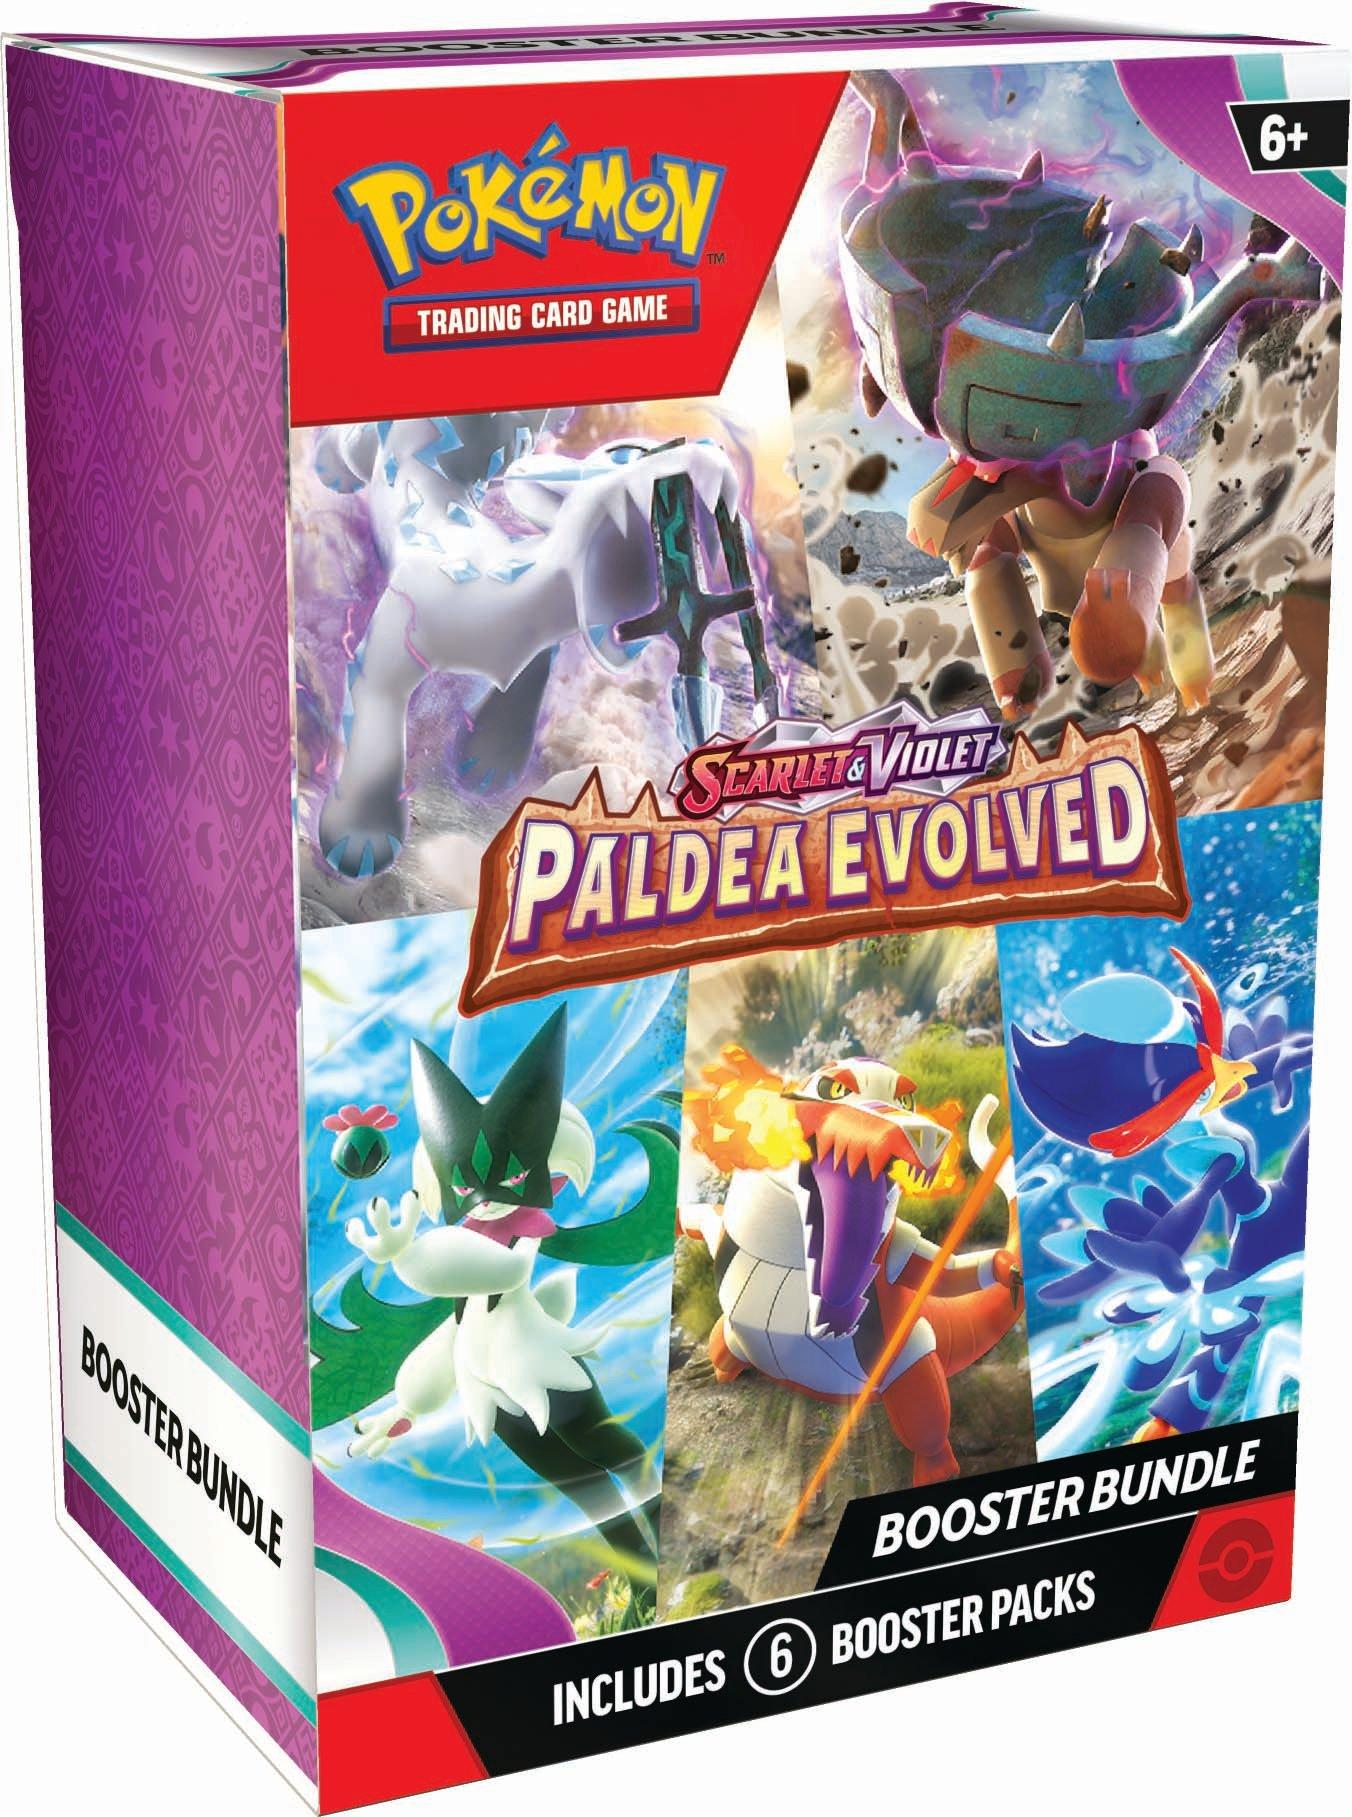 Check out an exclusive reveal of Pokémon TCG: Scarlet & Violet